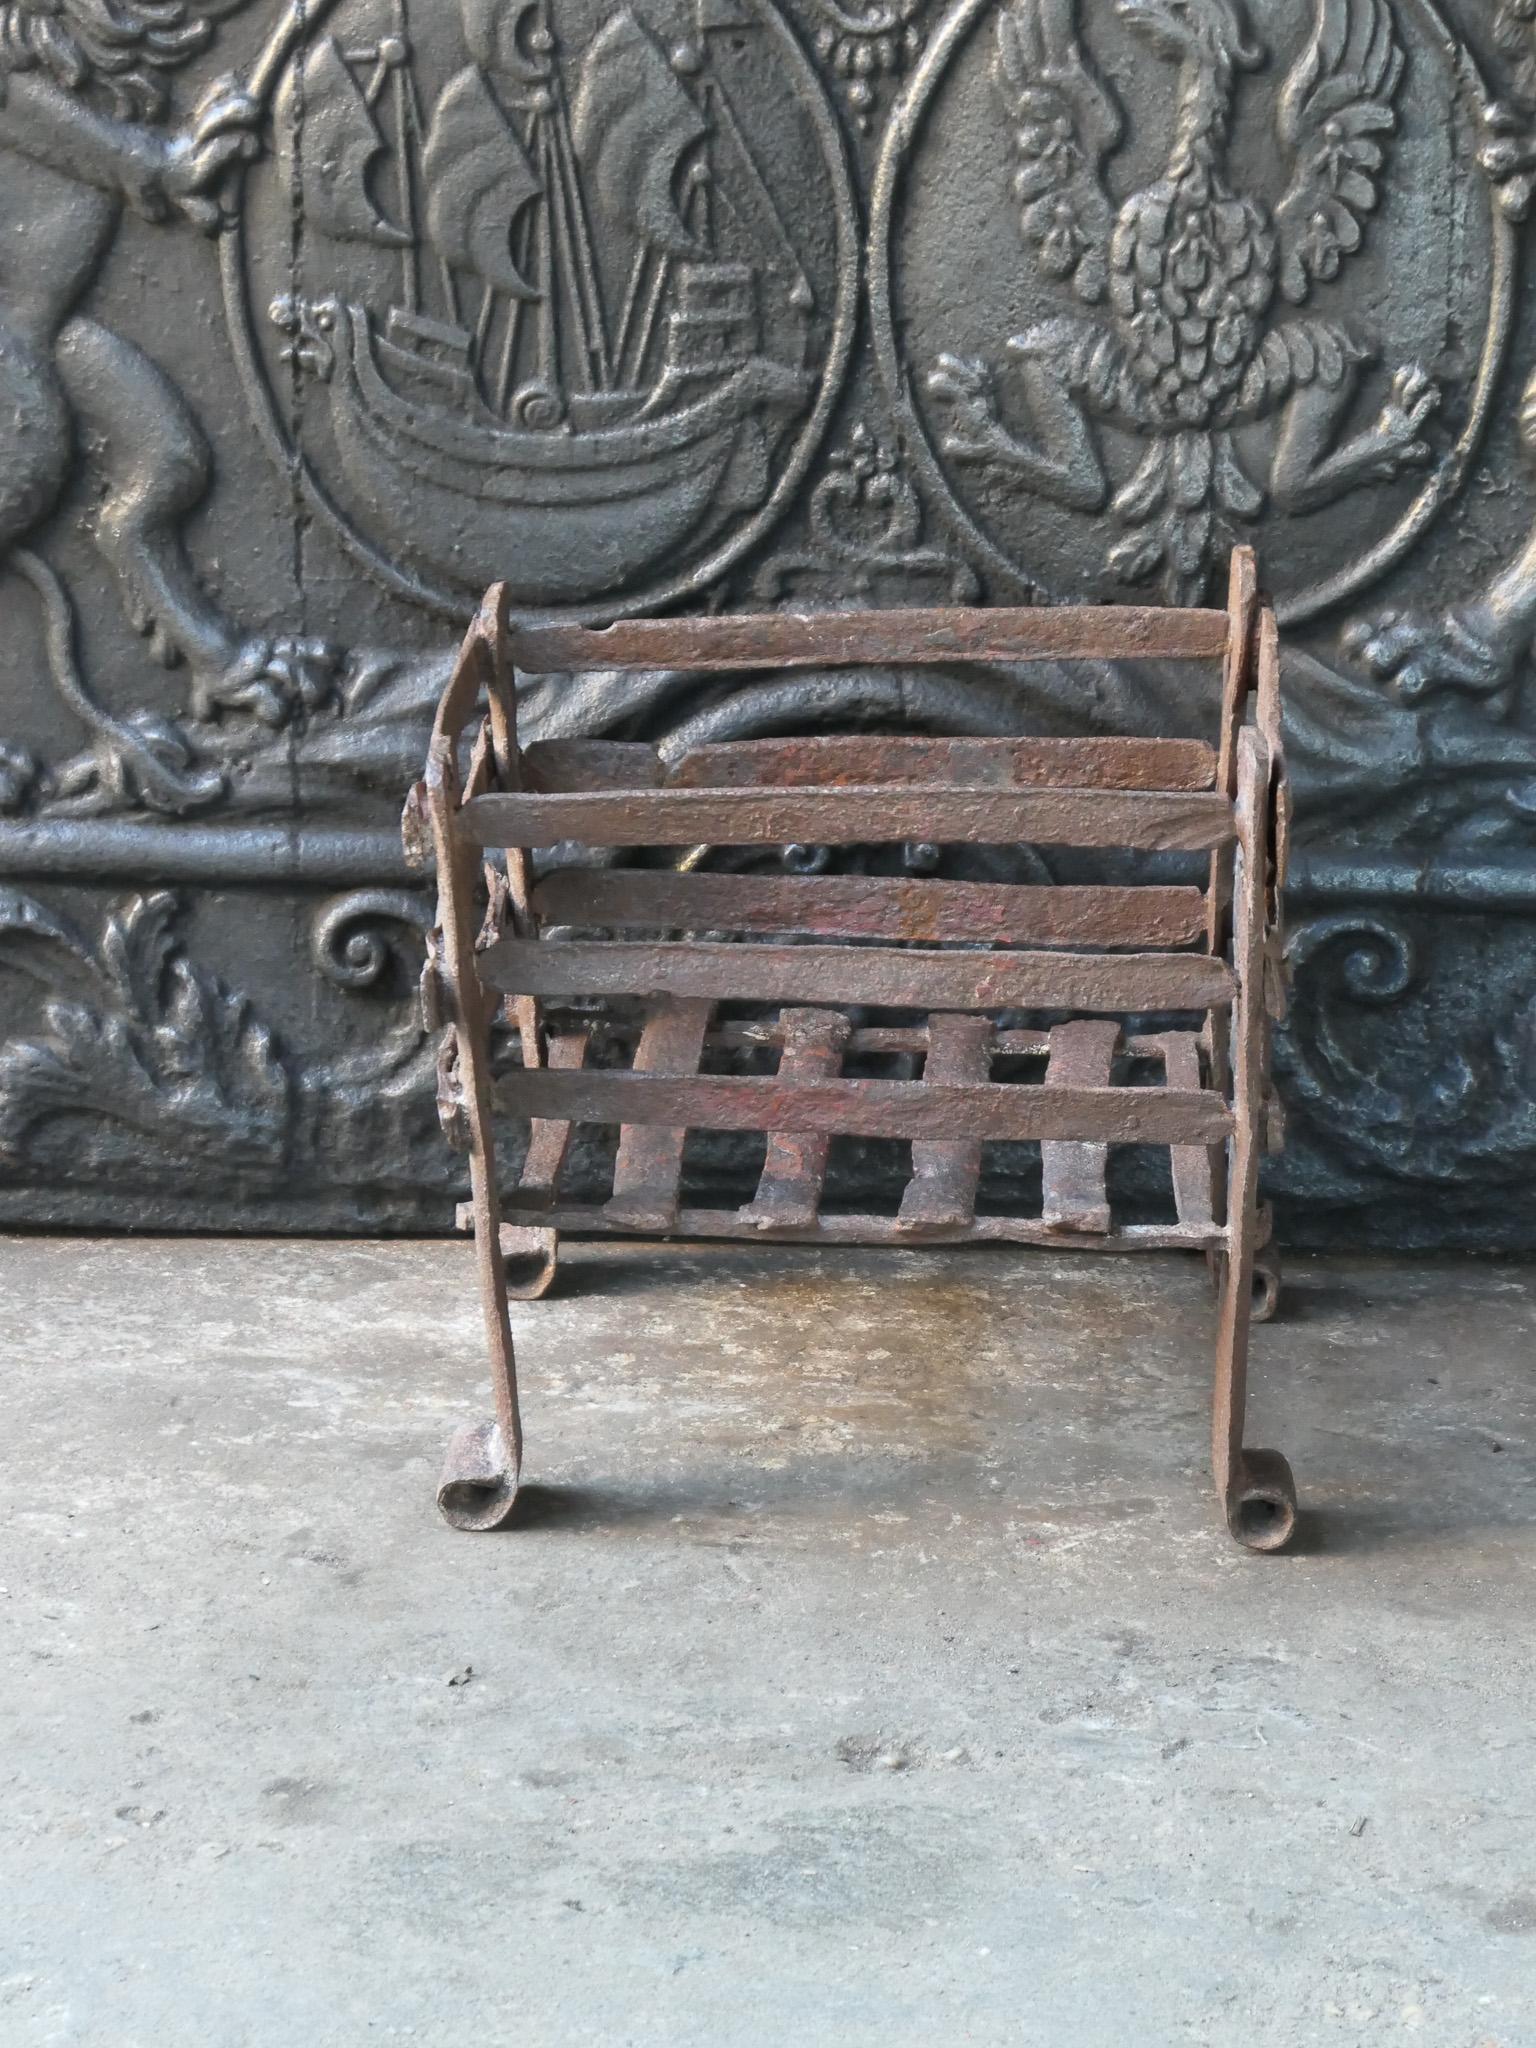 French 17th century fireplace basket or fire grate from the Louis XIV period. The fireplace grate is hand forged of wrought iron. The condition is good. 



















 